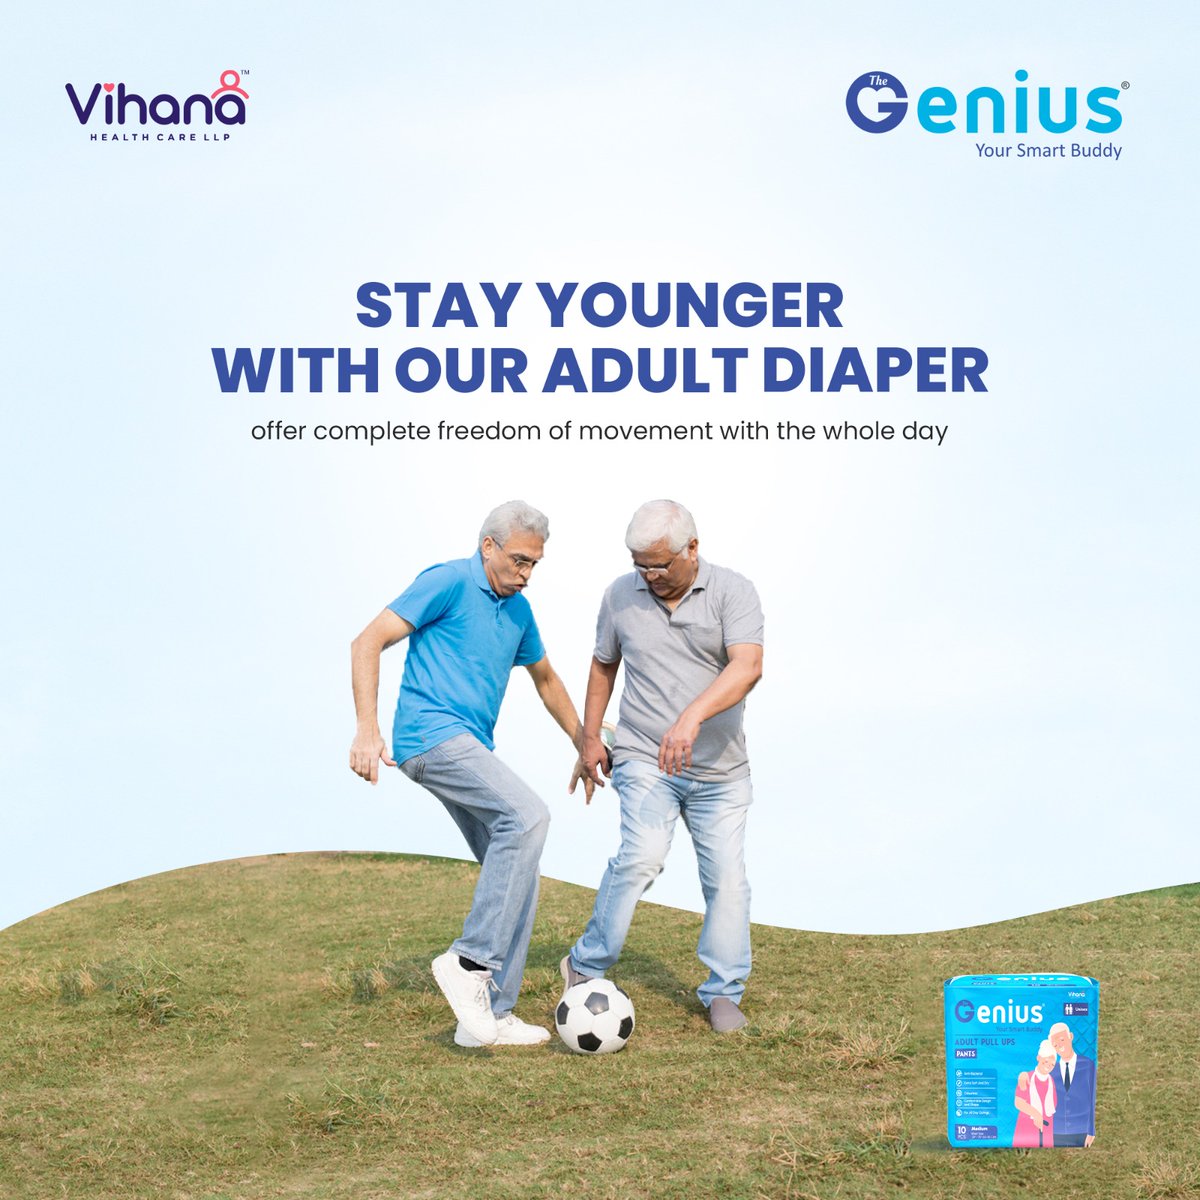 Stay younger with our adult diaper offer complete freedom of movement with the whole day.
.
#adultdiapers #incontinenceproducts #adultpants #diaperbriefs #seniorcare #elderlycare #incontinenceissues #bladderleakage #diaperlover #urinaryincontinence #incontinencesupport #depend